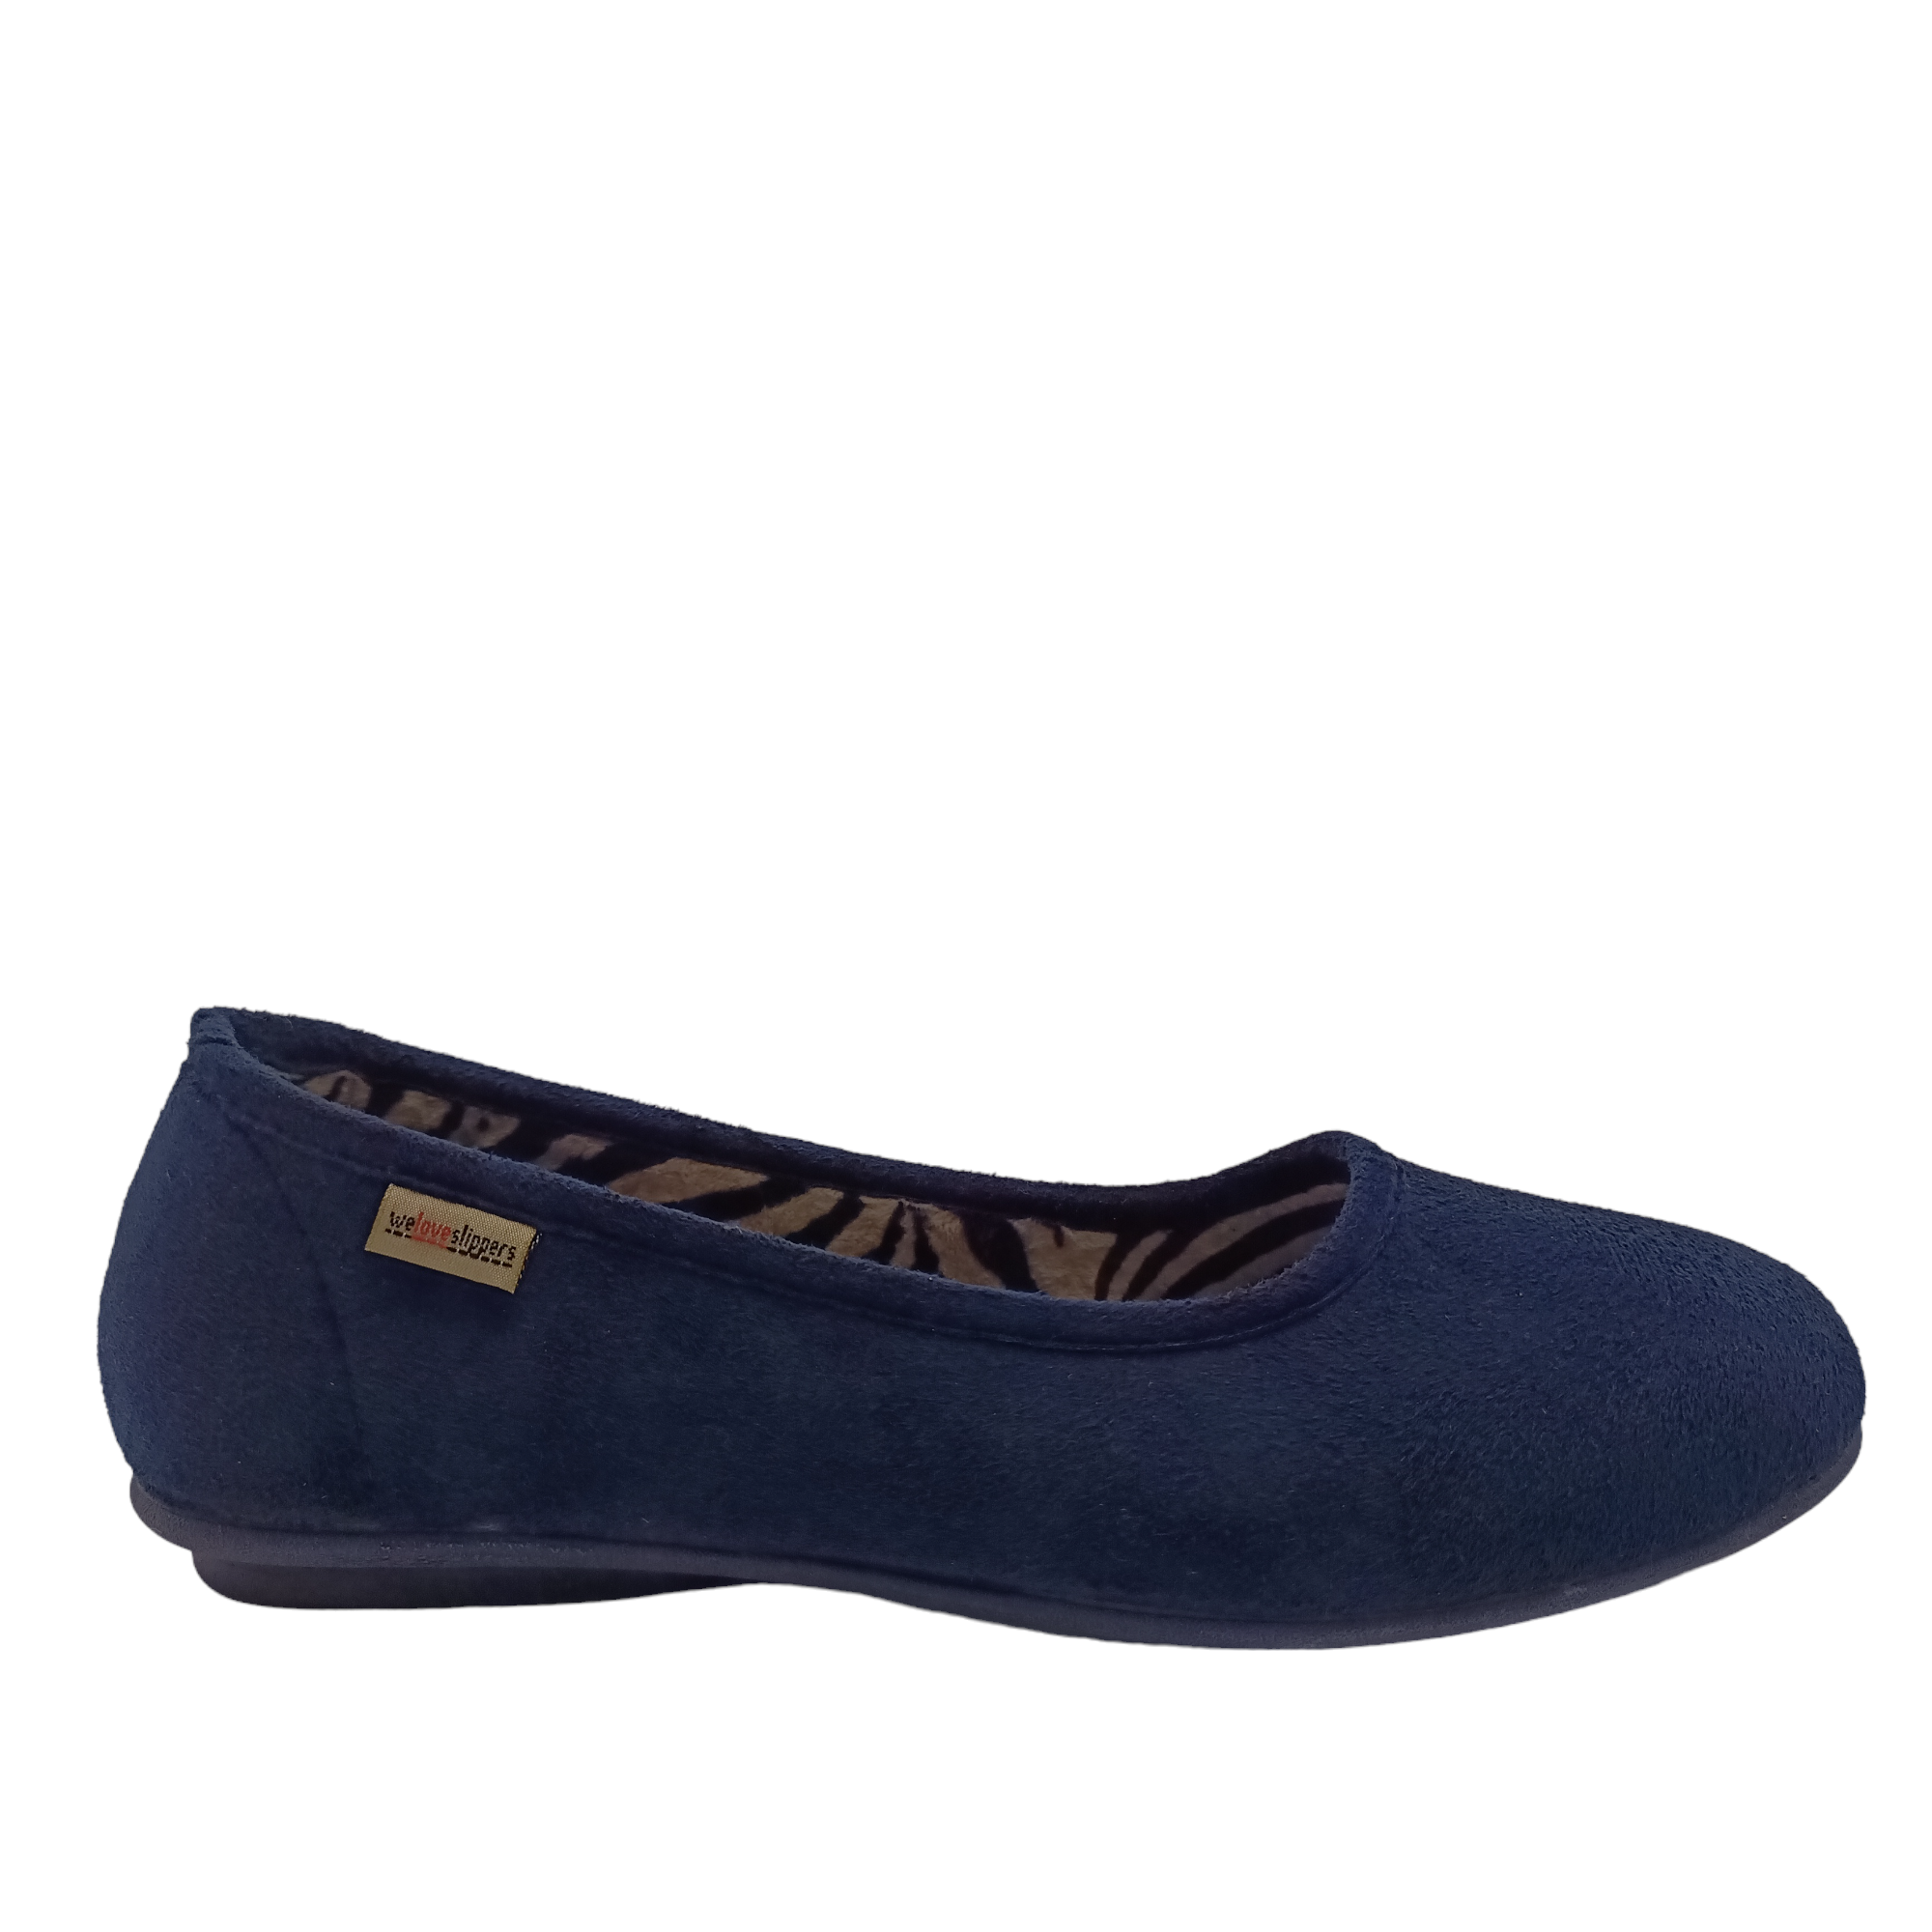 Front view of navy Nuzzle Slippers with zebra print lining. Shop Womens Slippers and Shoes Online and In-store with shoe&me.